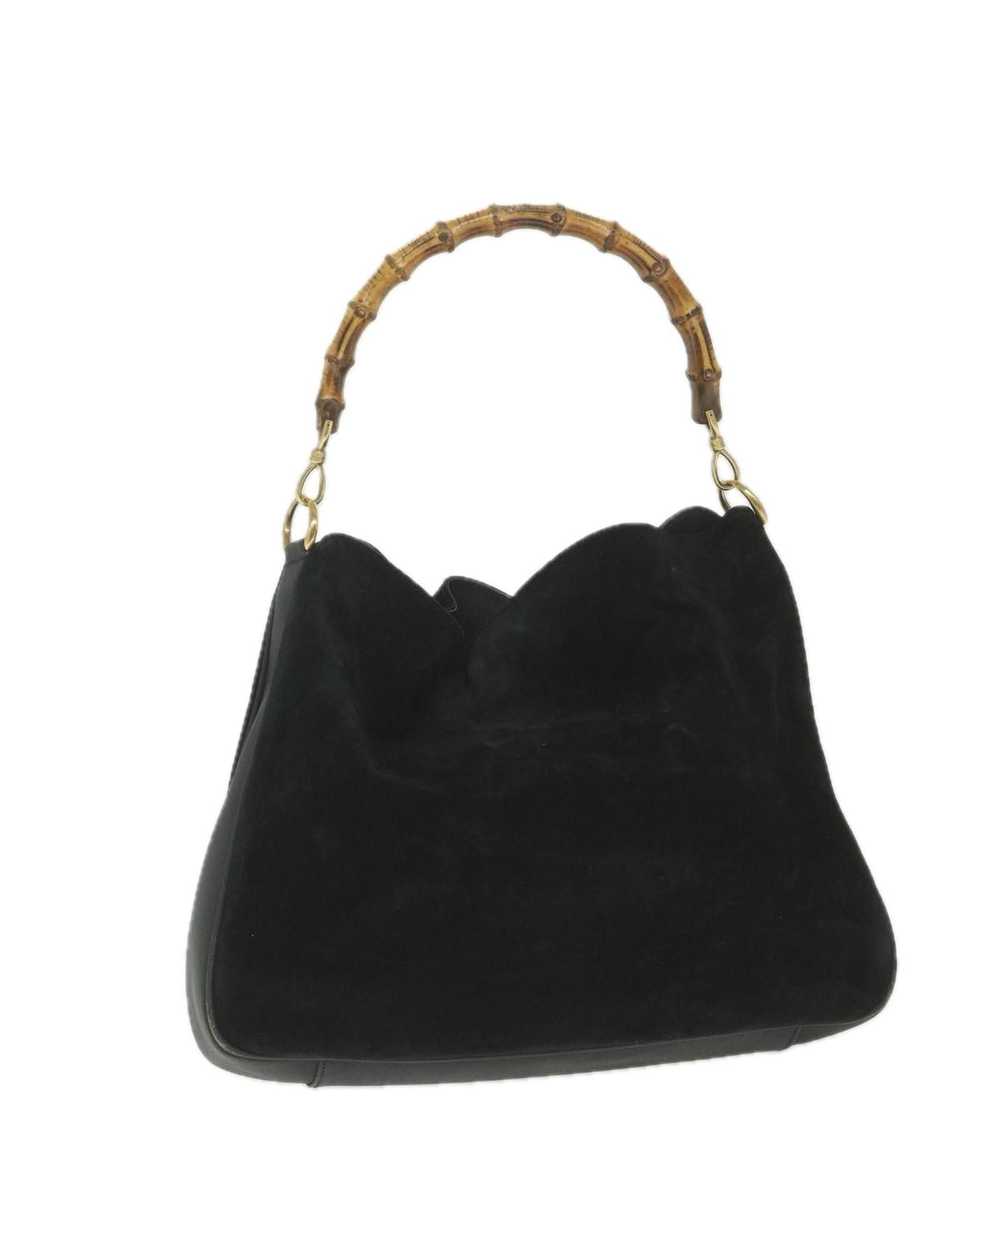 Gucci Black Suede Shoulder Bag with Bamboo Handle - image 1